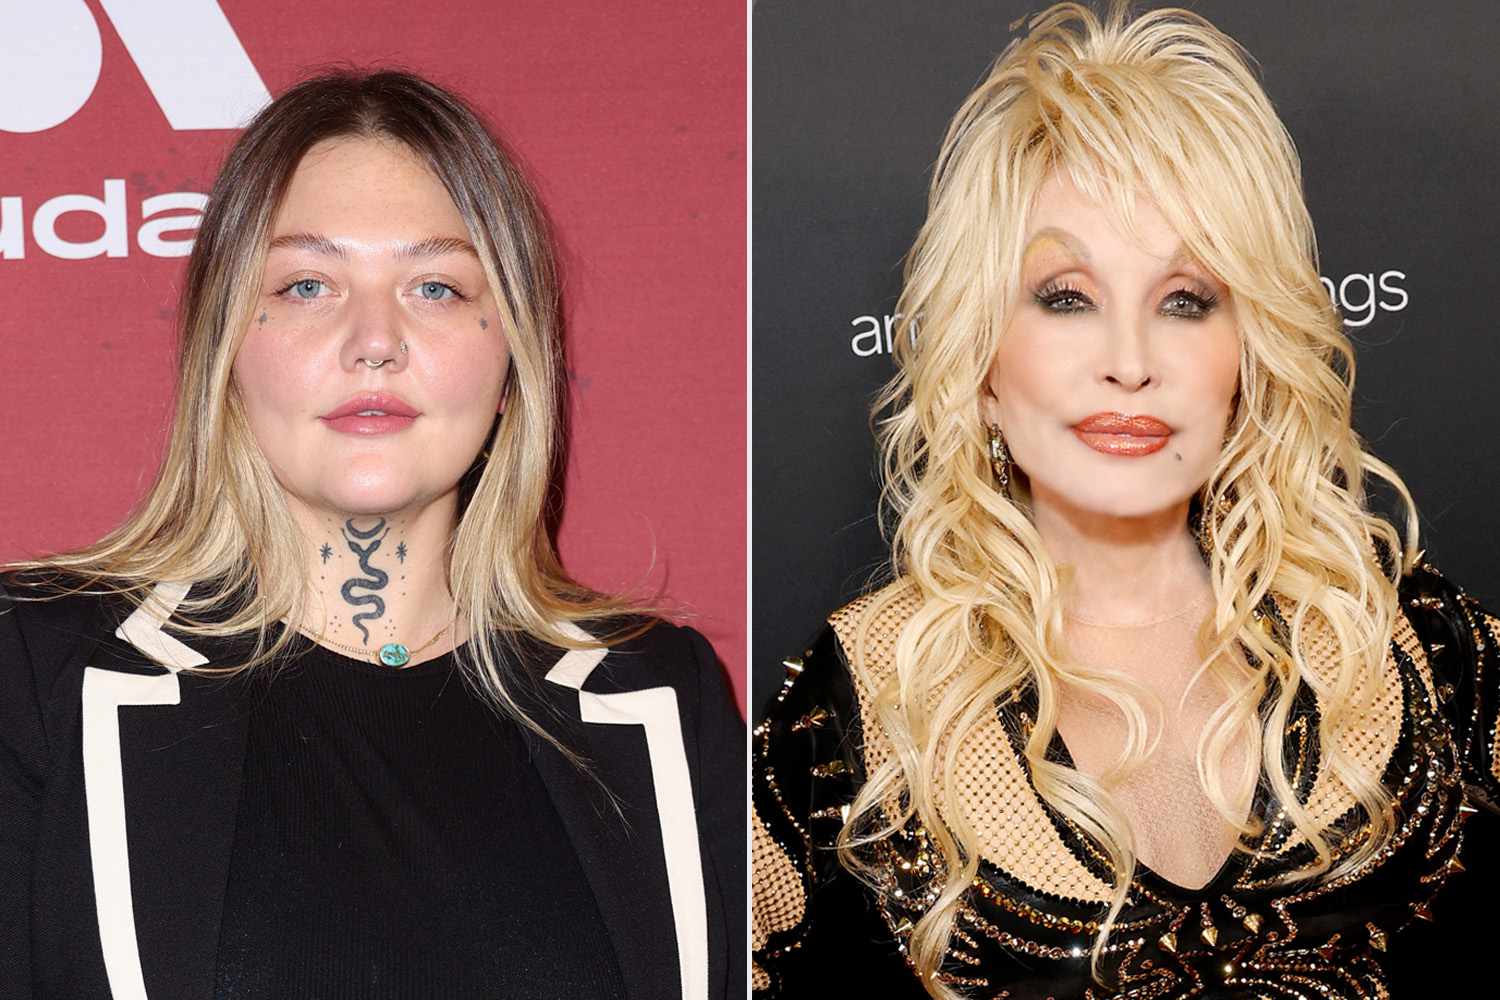 Elle King opens up about drunken Dolly Parton tribute performance: 'I can learn from my mistakes'